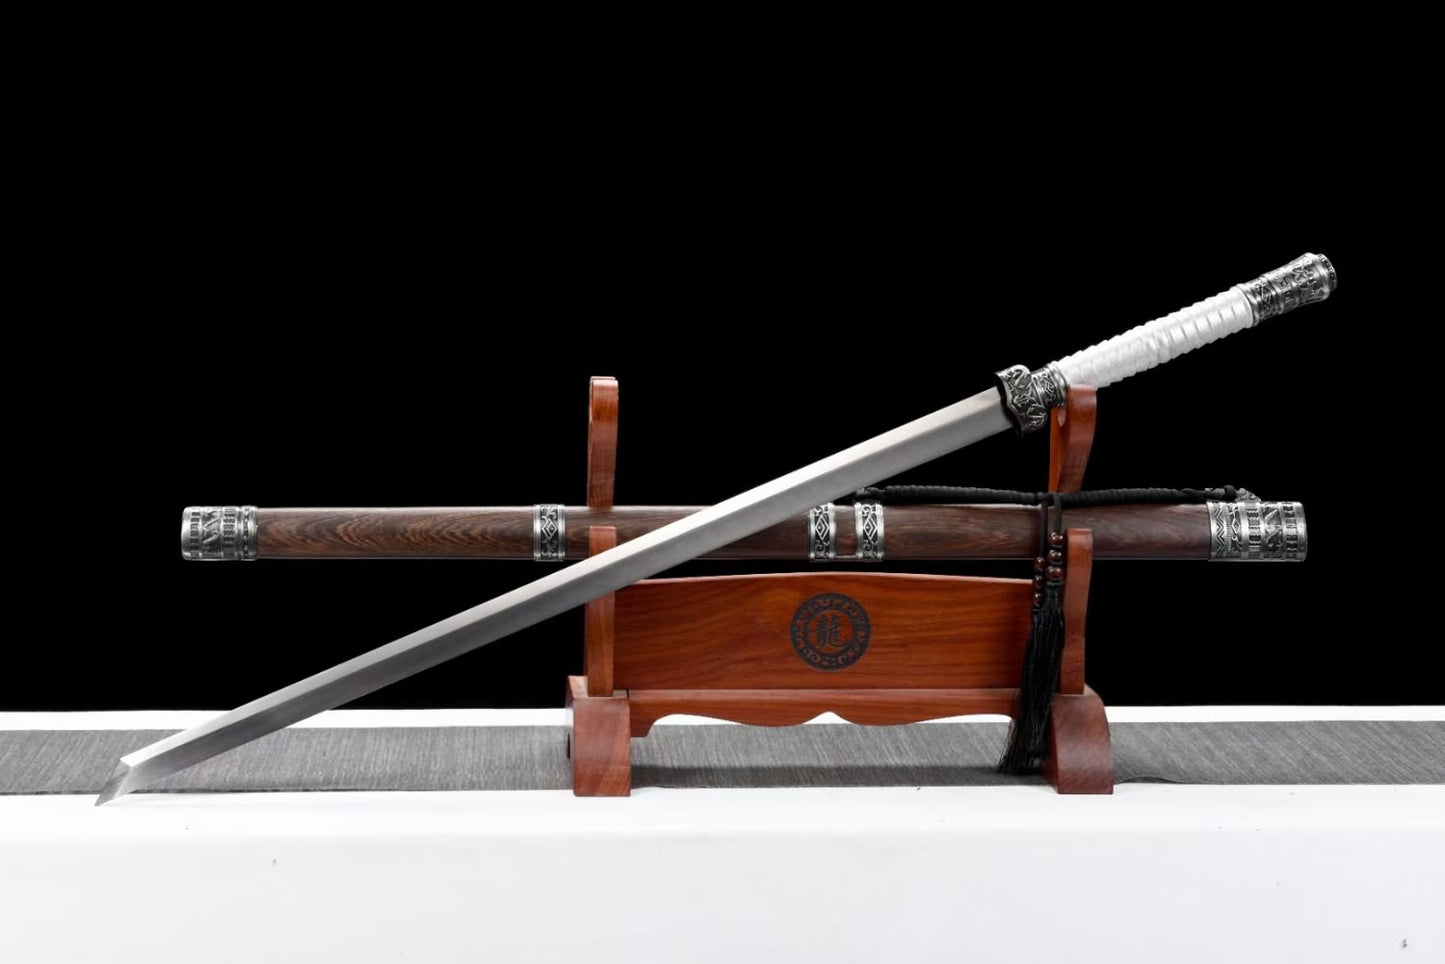 WoLong jian Sword Forged Spring Steel Blade,Alloy Fittings,Rosewood Scabbard